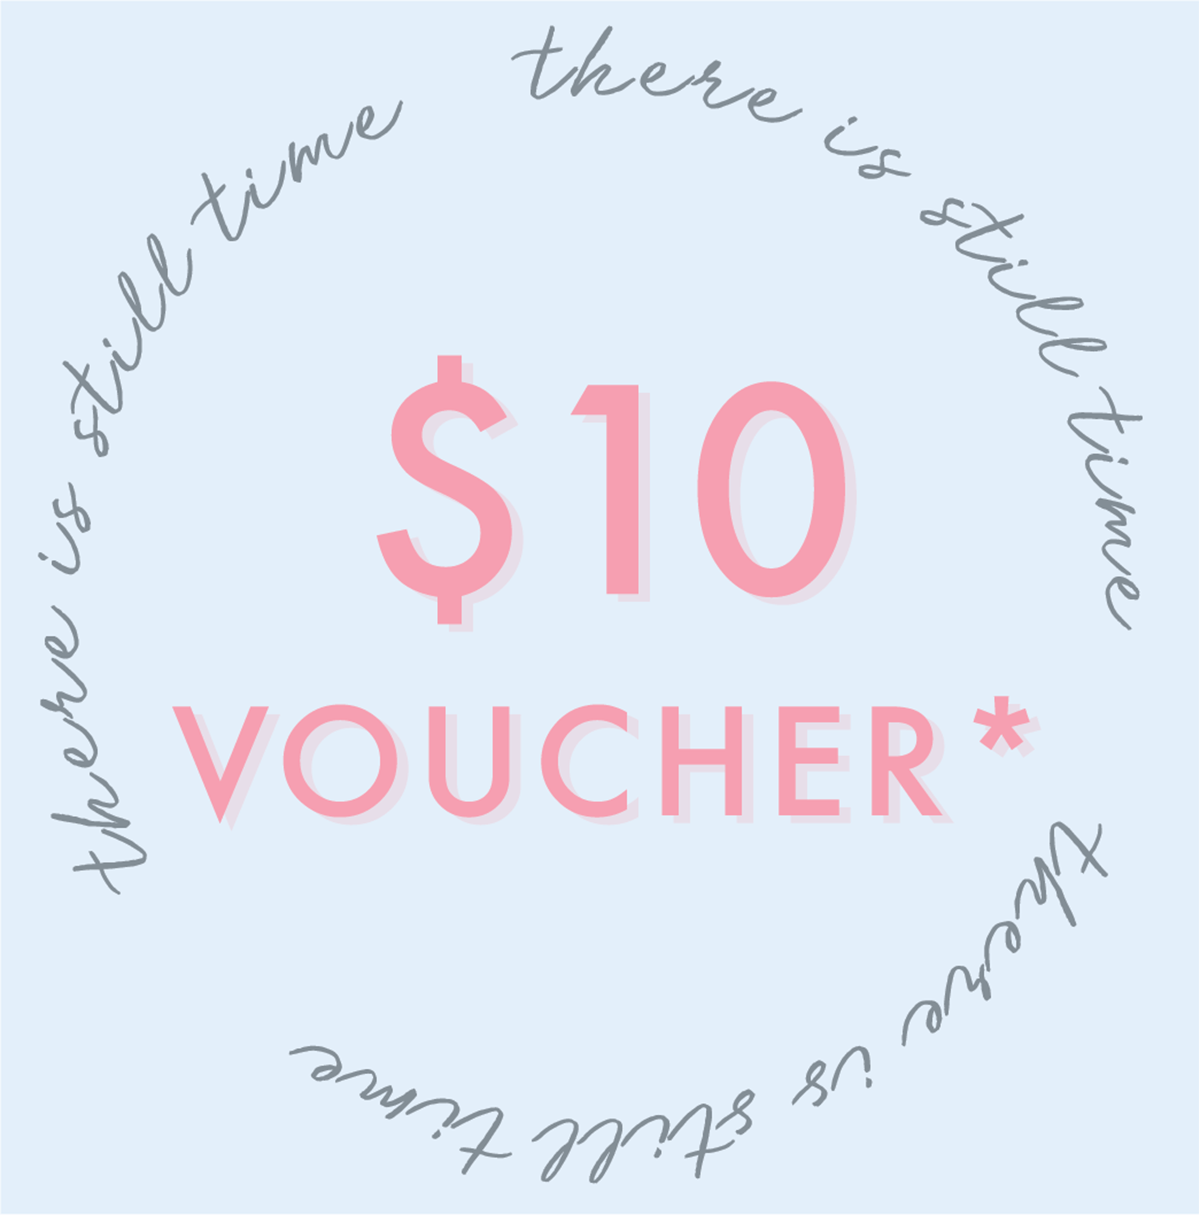 Don't forget your $10 voucher. 